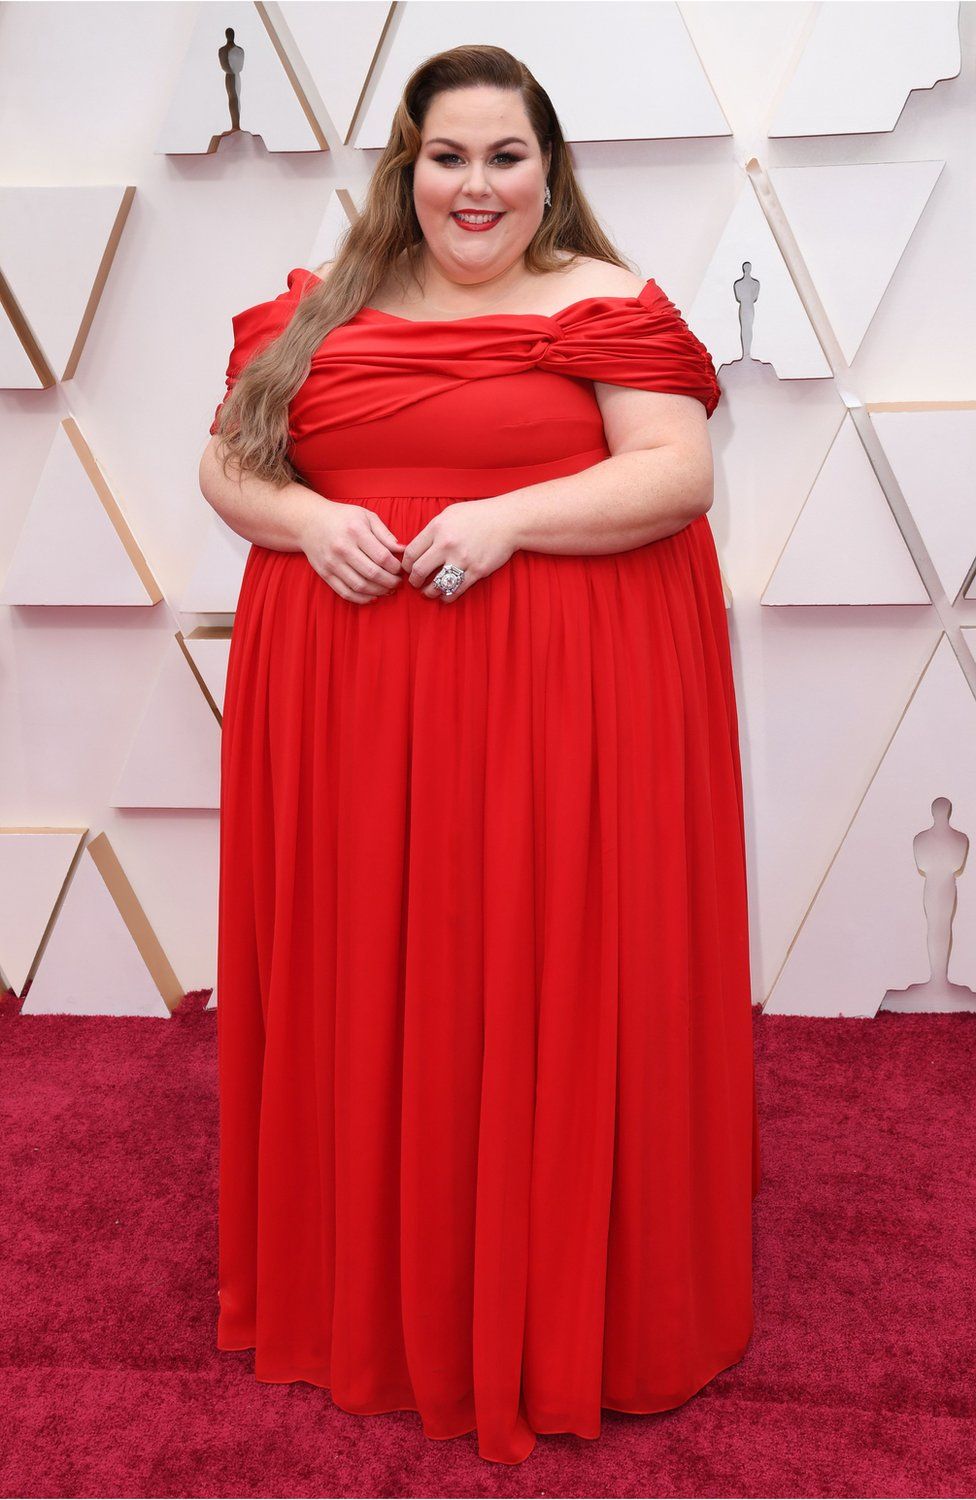 Chrissy Metz in red dress on the red carpet